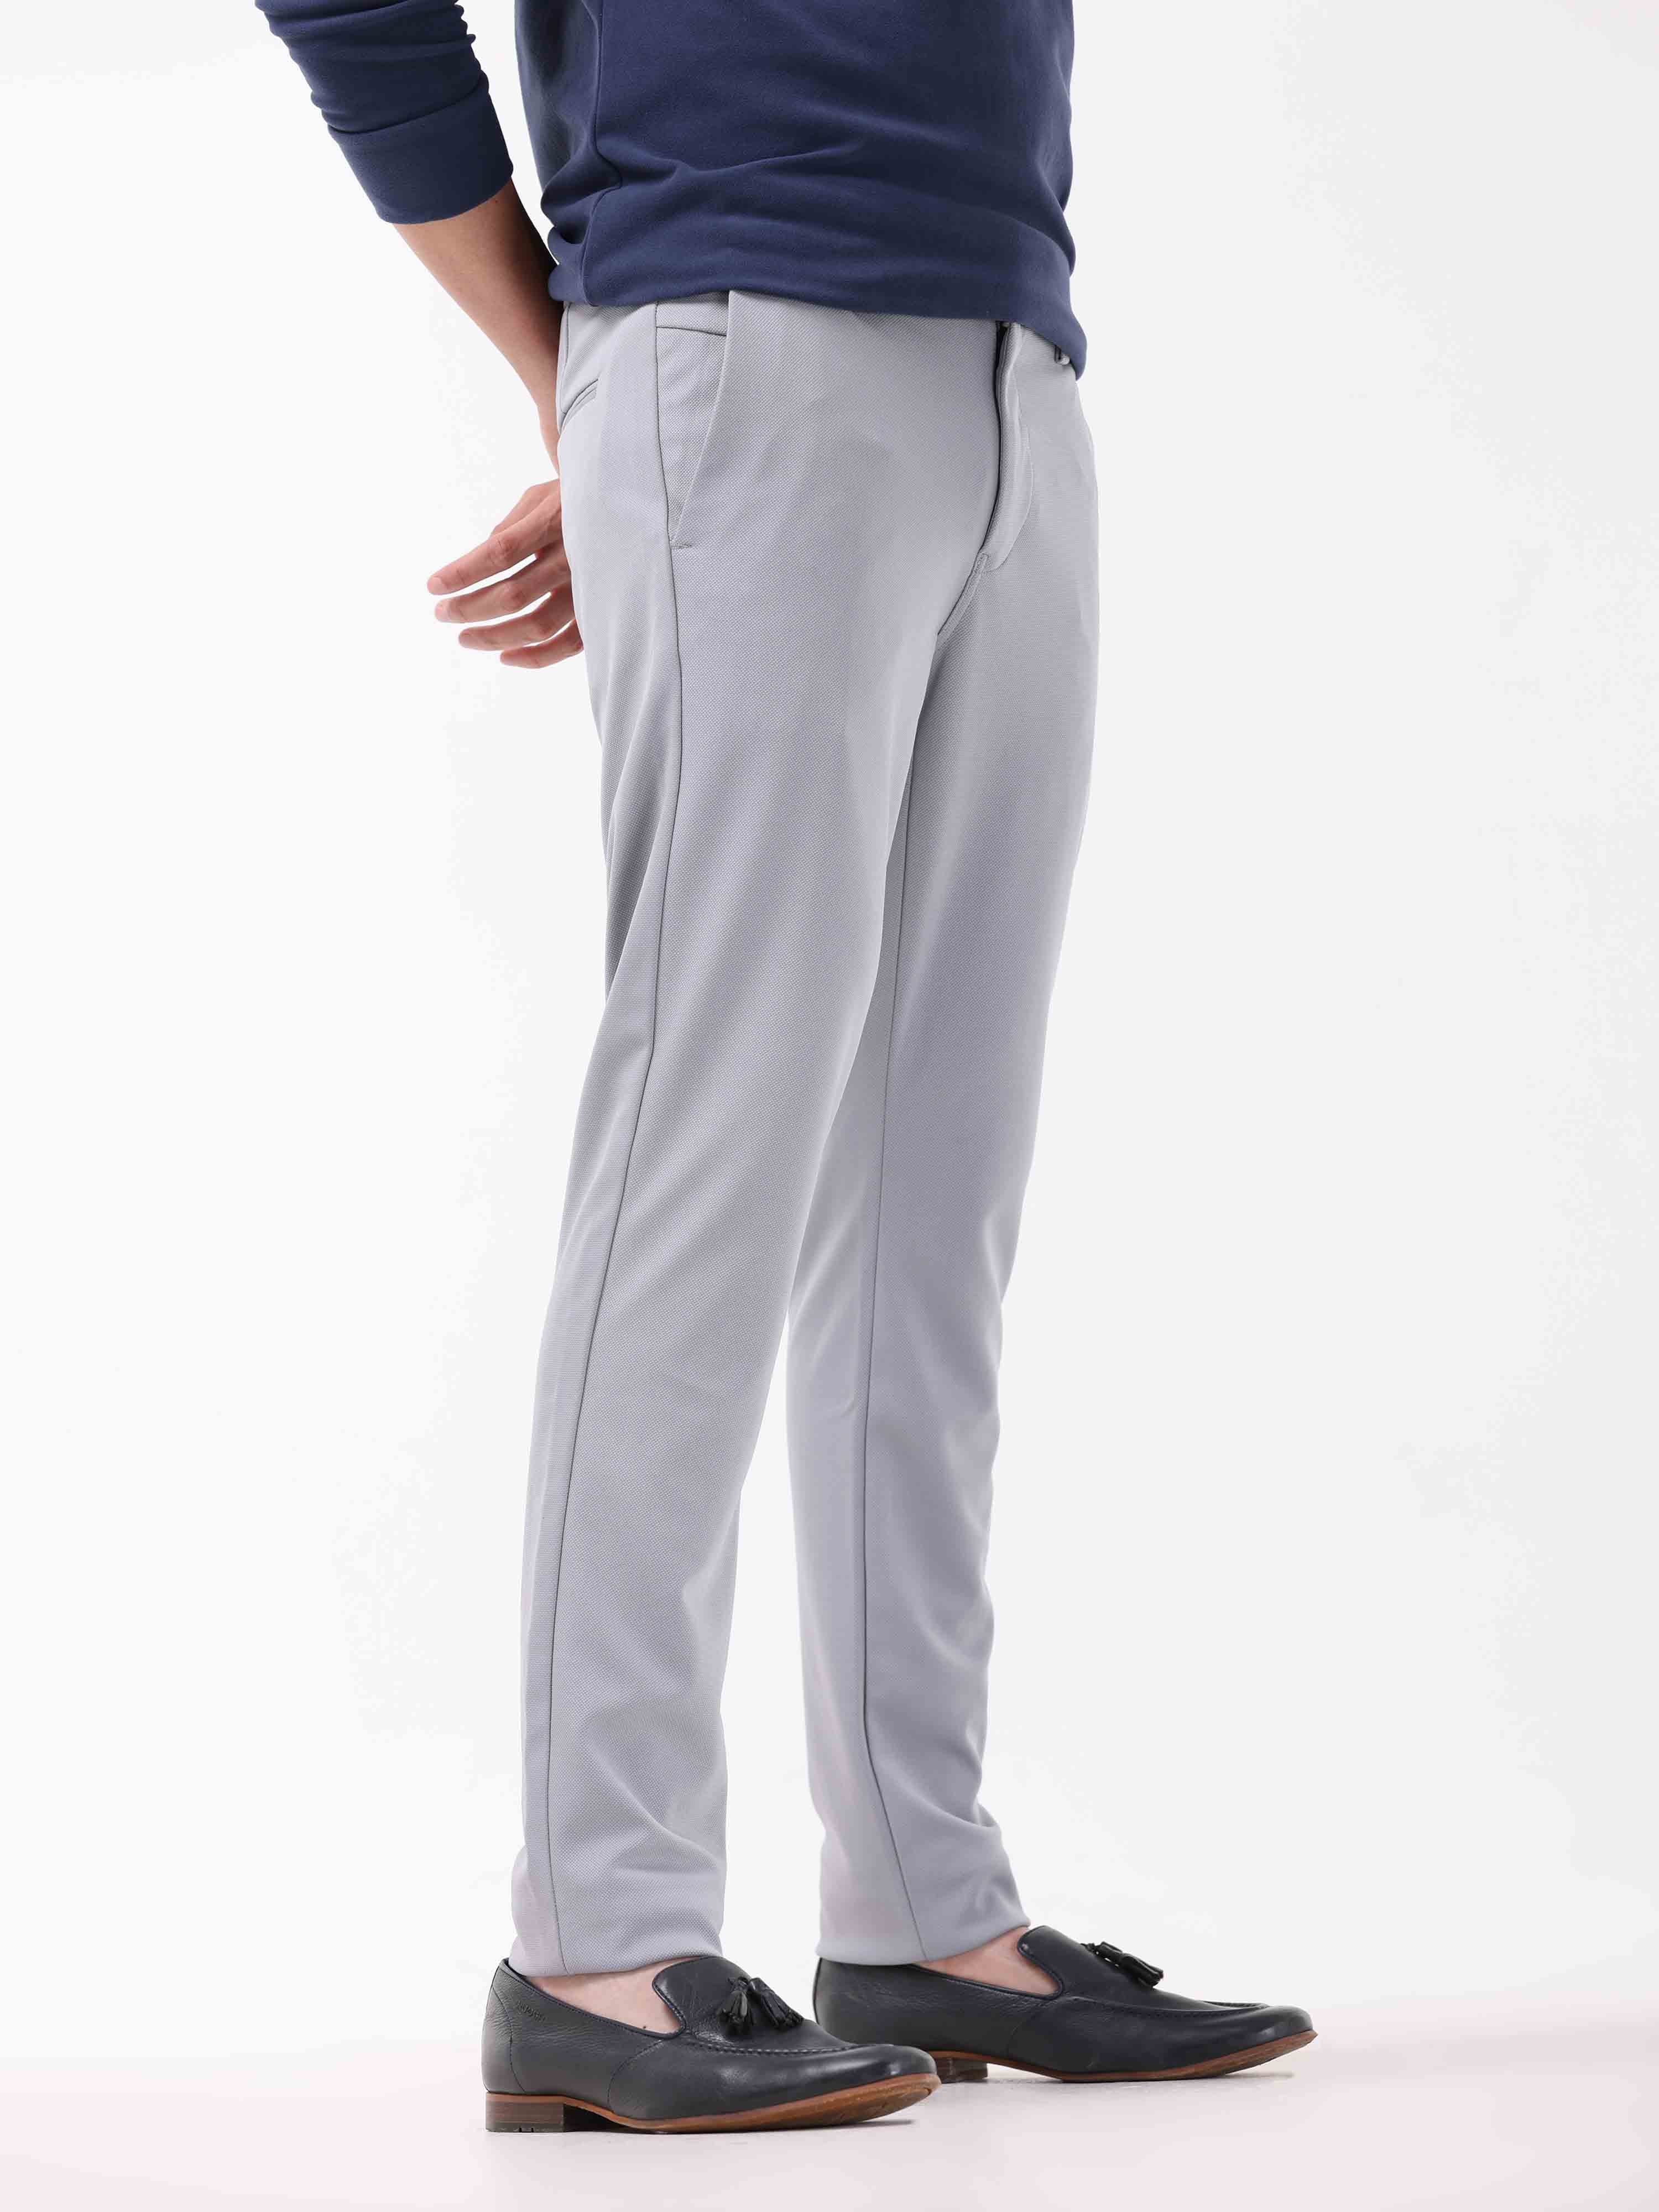 Buy Urbano Fashion Men Grey Slim Fit Checkered Casual Chinos Pants with  Stretch Online at Low Prices in India - Paytmmall.com